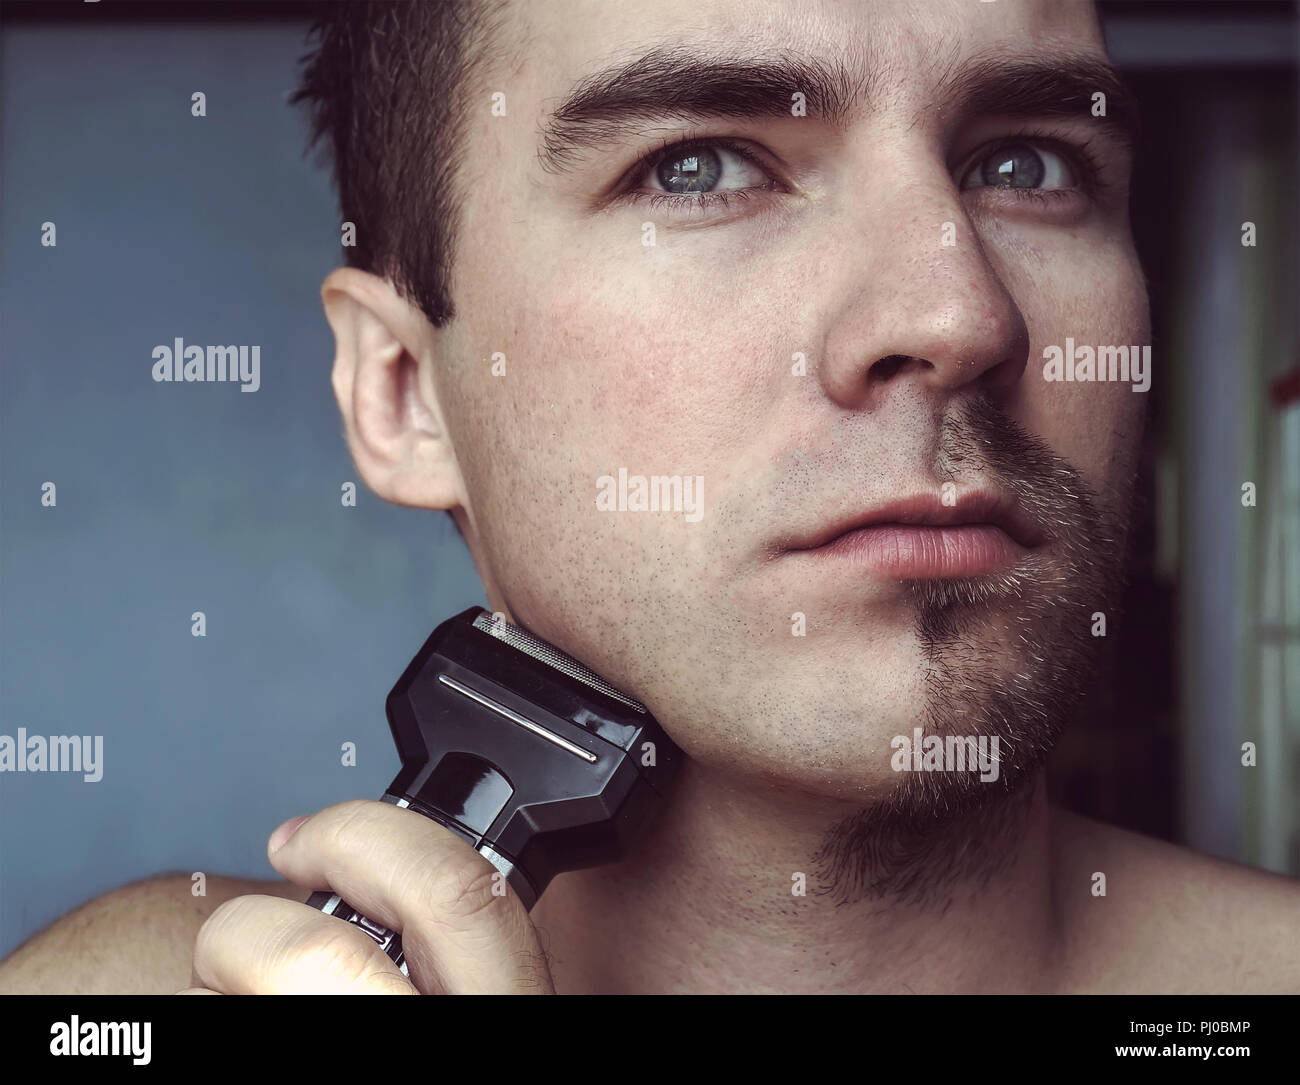 Young bearded man during grooming of beard using trimmer. Half face with a beard half shaved. Stock Photo